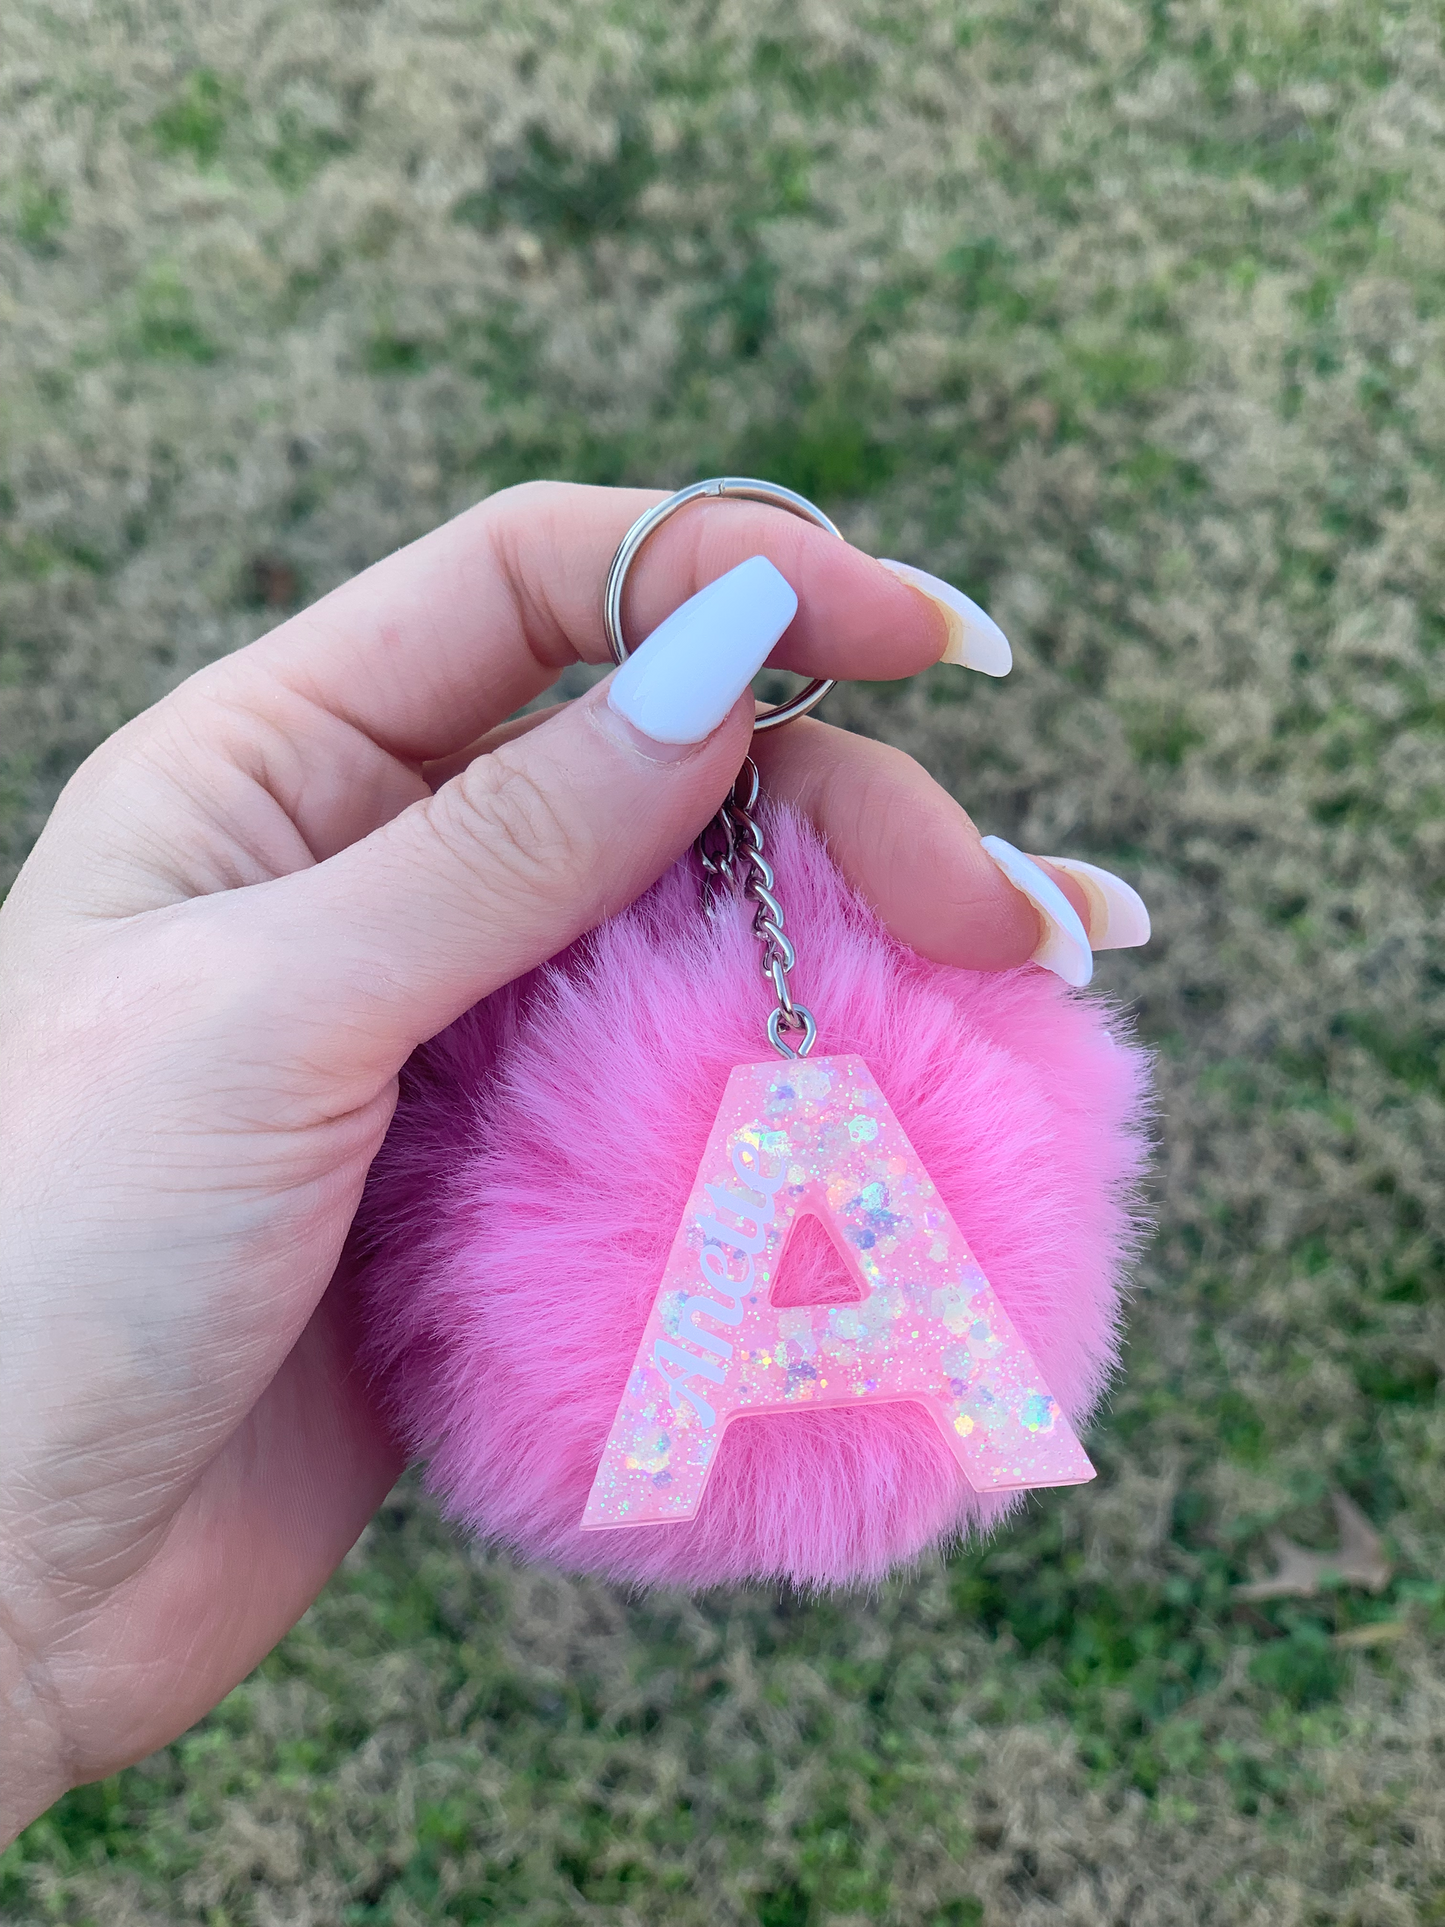 Personalized Resin Keychain, Custom Keychain, Personalized Gift,Kids backpack initial accessory, llaveros personalizados, llaveros